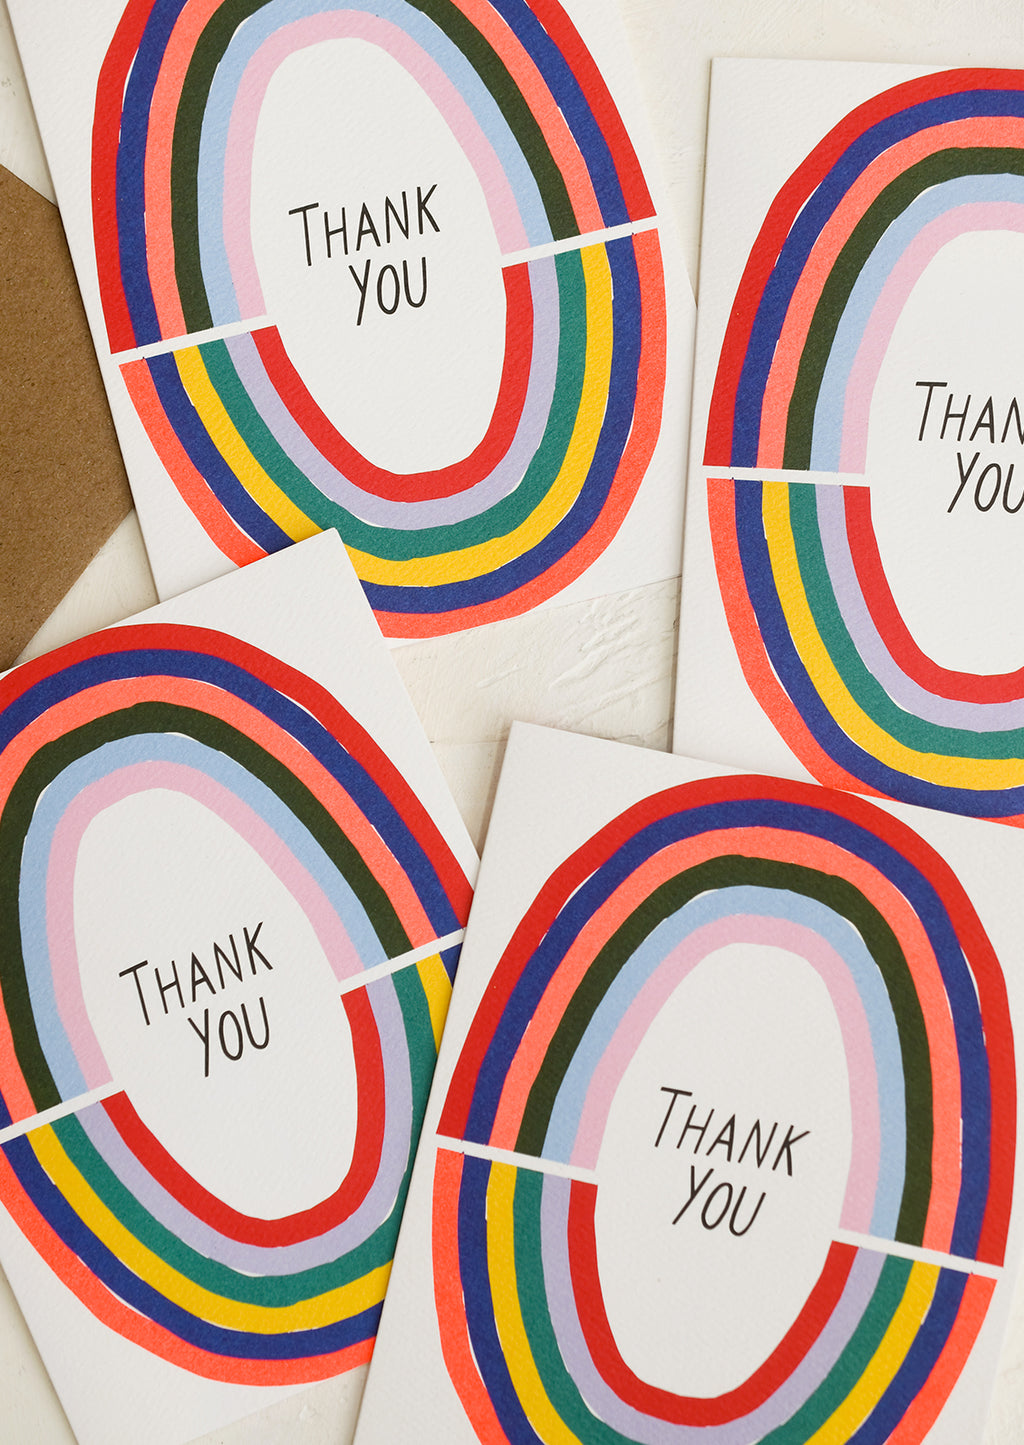 Boxed Set of 8: A set of rainbow colored thank you cards.